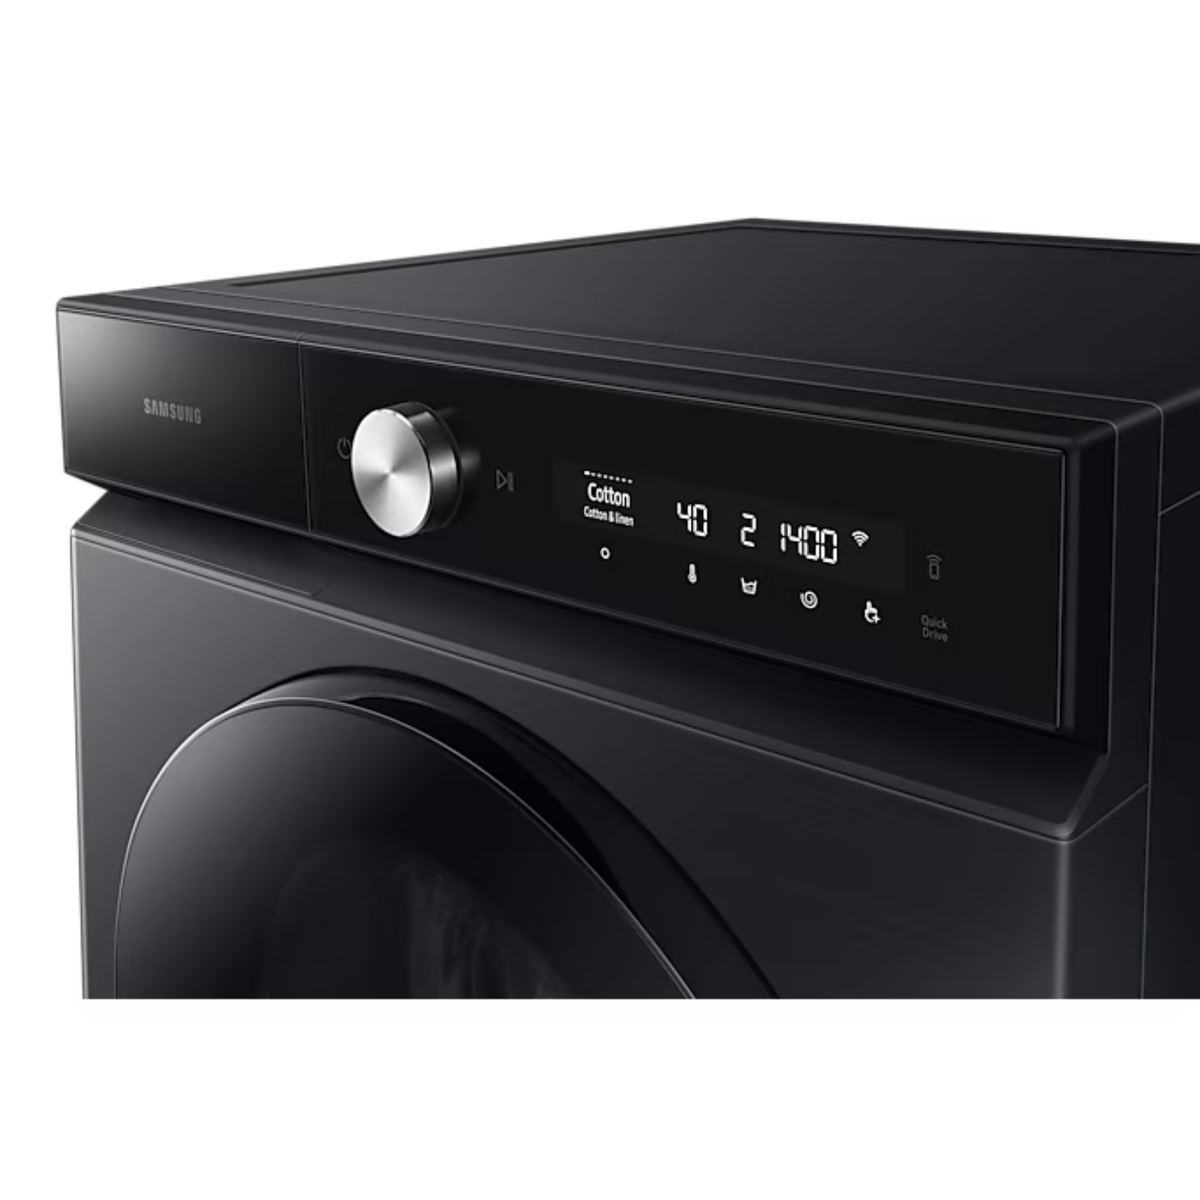 Samsung Front Load Washer with AI Ecobubble and AI Wash, 11.5 Kg, 1400 RPM, Black, WW11BB944DGBGU